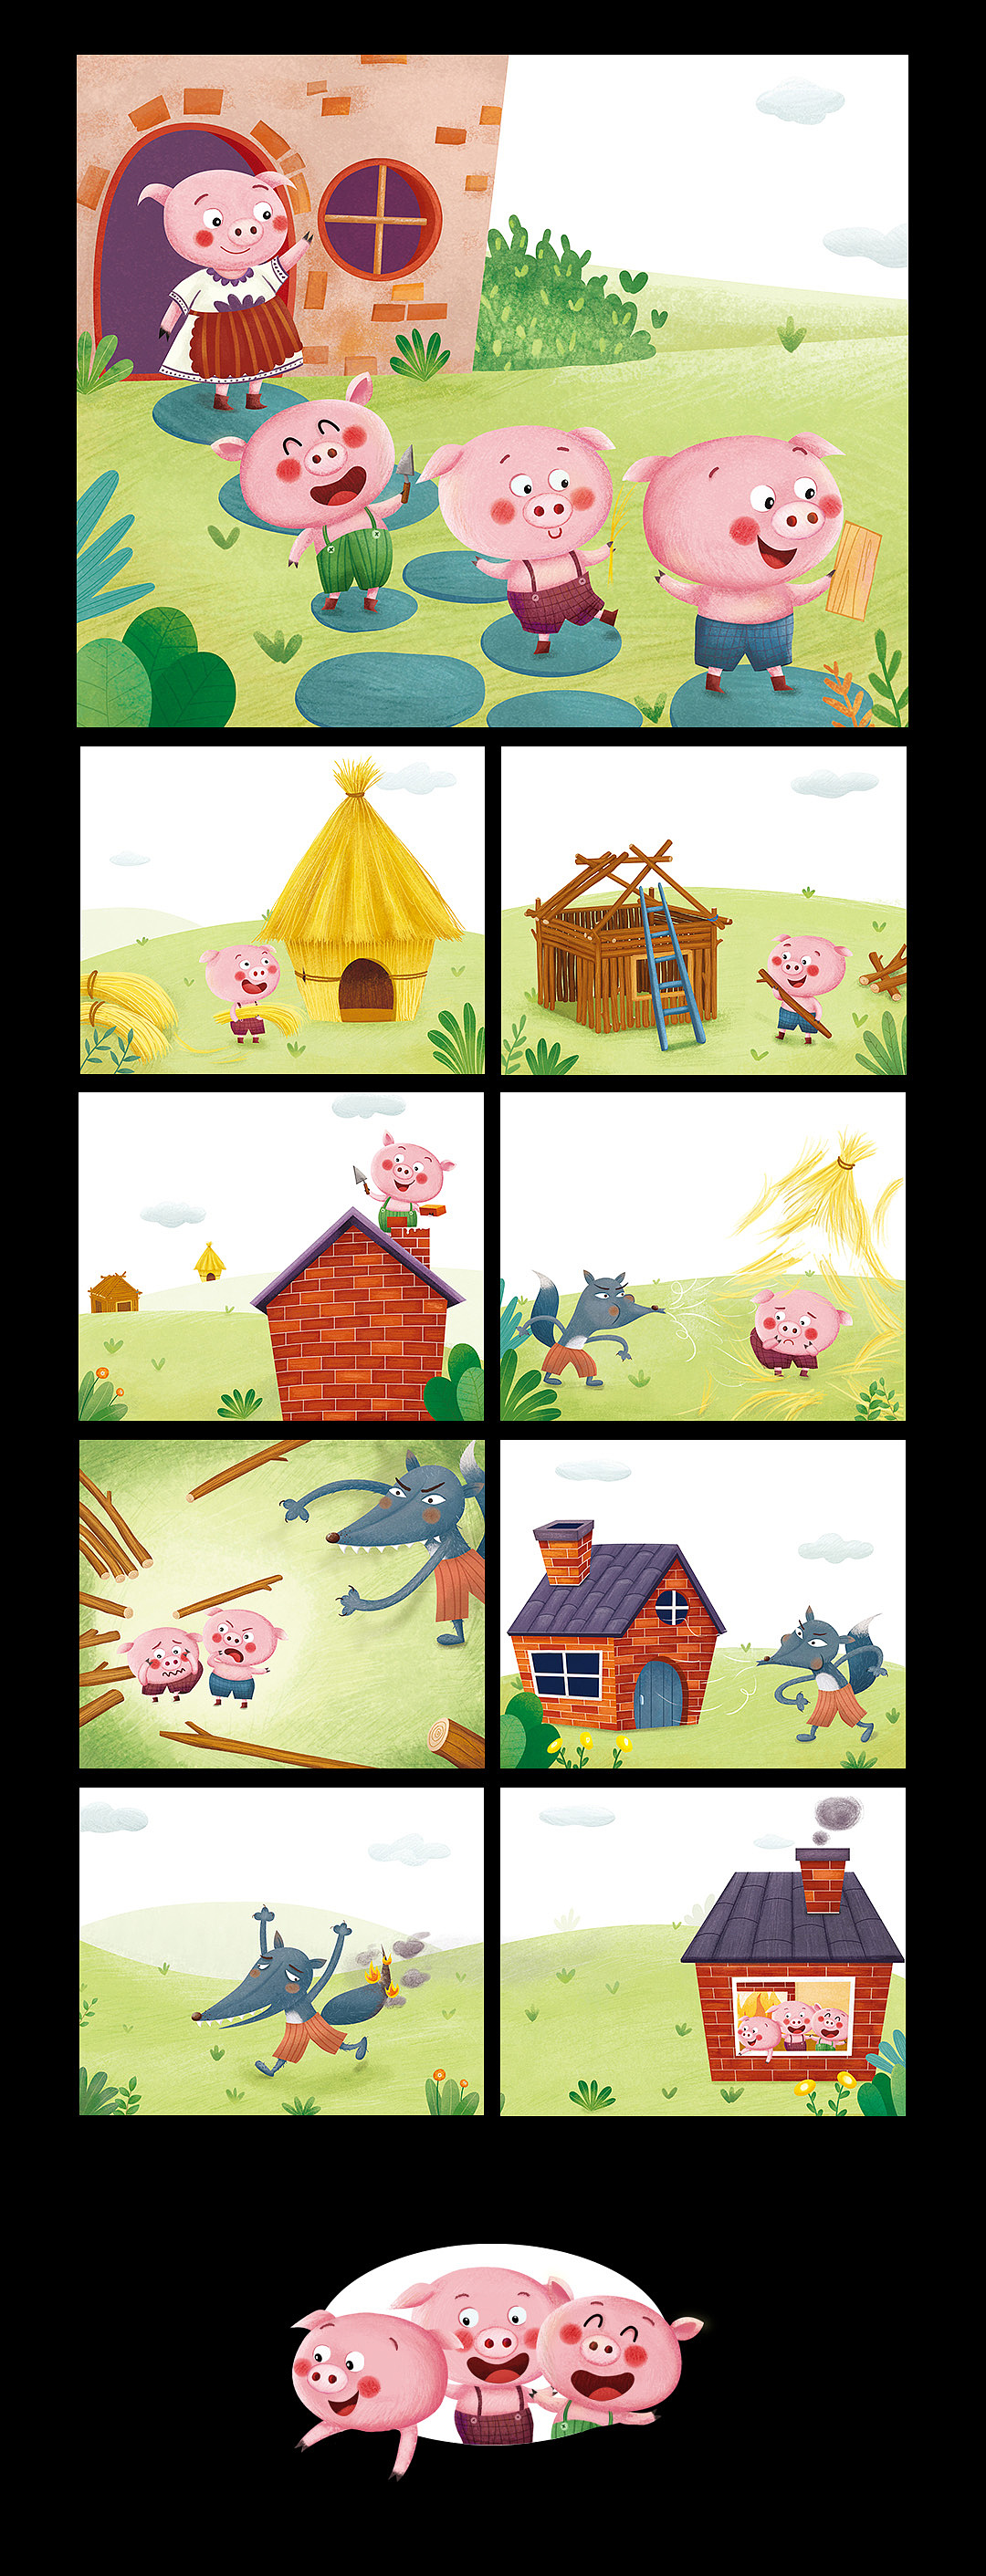 Three little pigs png image_picture free download 400280616_lovepik.com